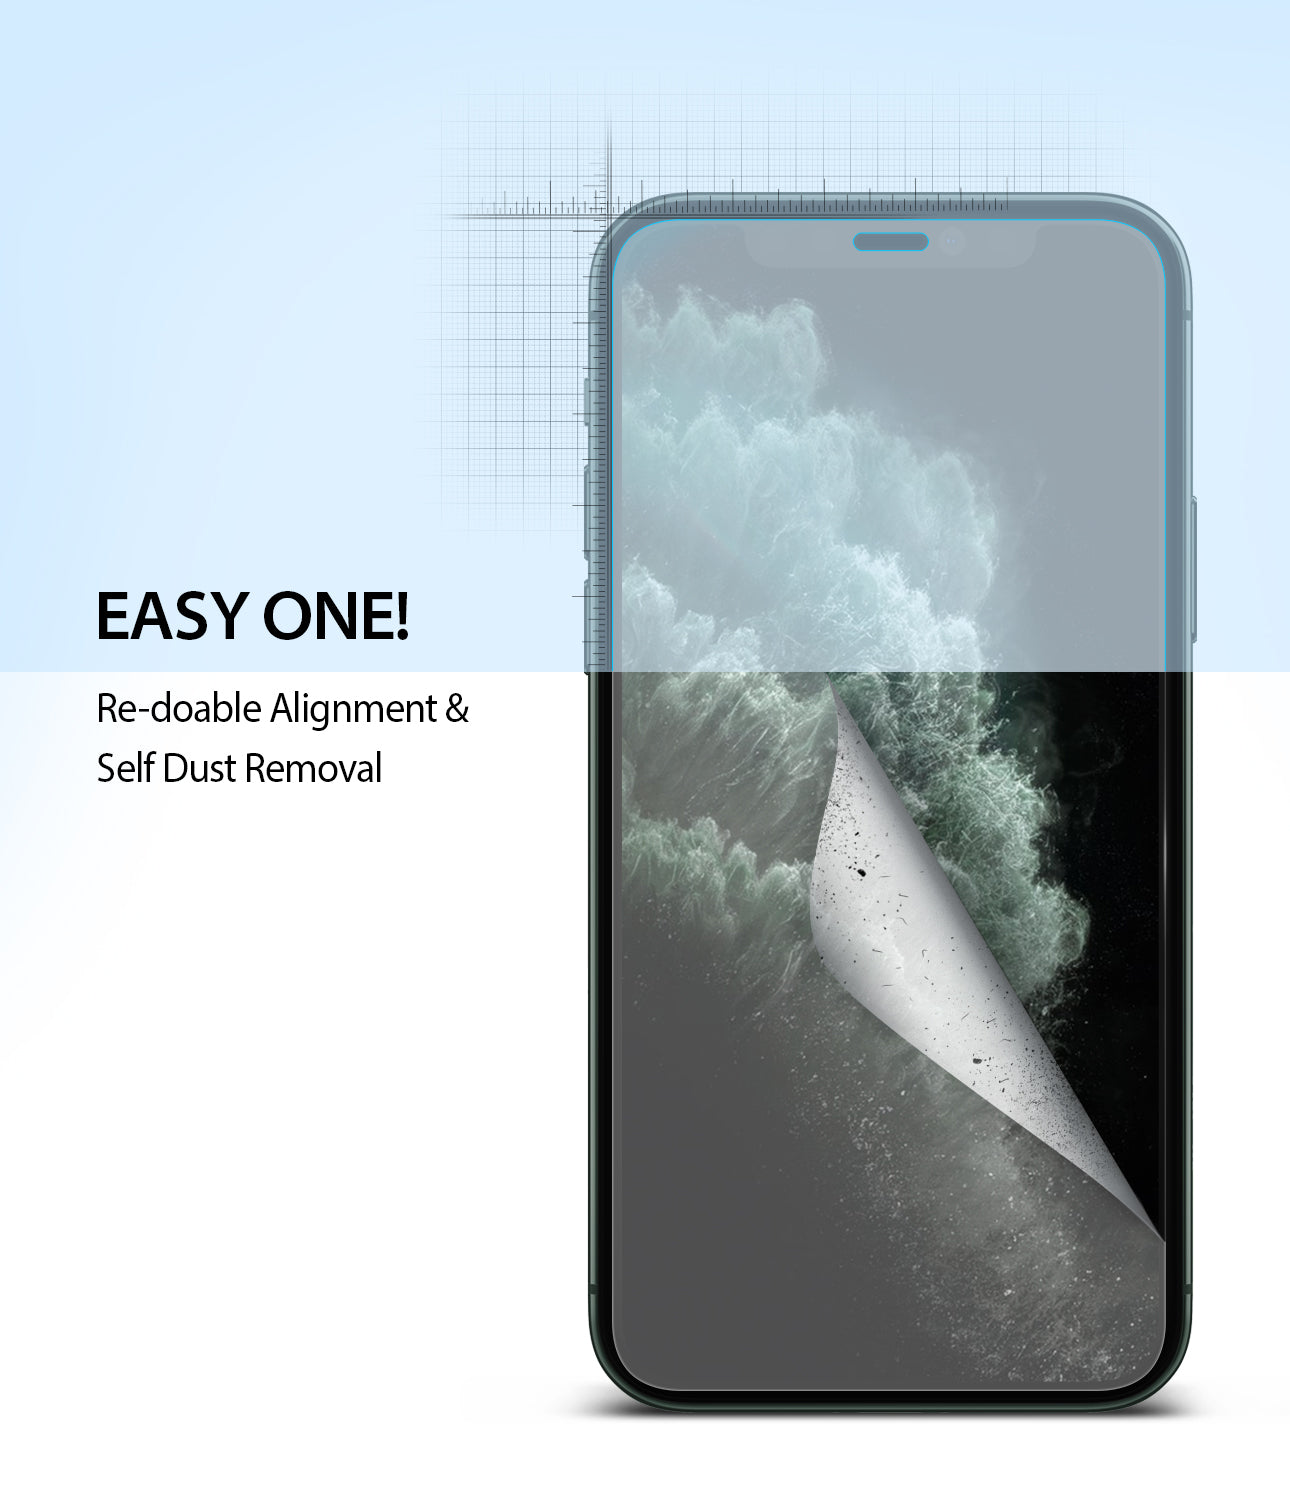 iPhone 11 Pro Max Screen Protector Dual Easy Film Easy One Installation Guide